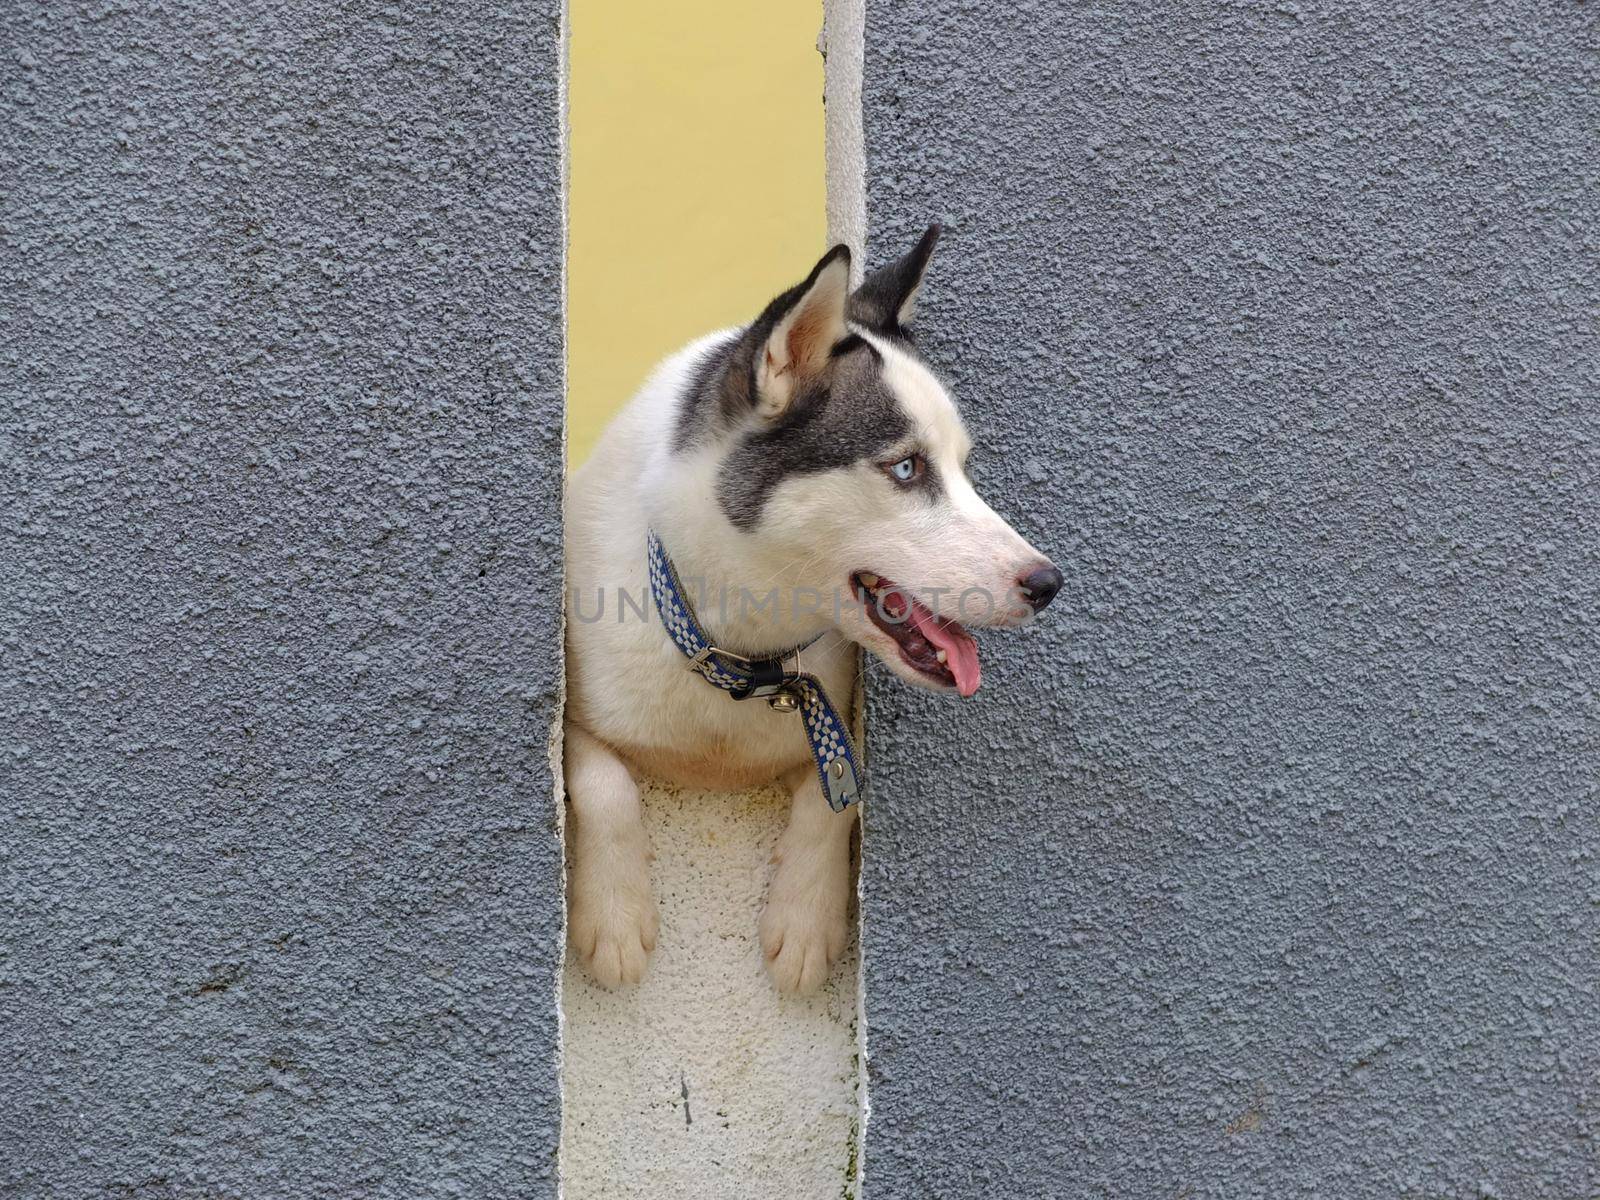 Husky looking through a hole in a wall.